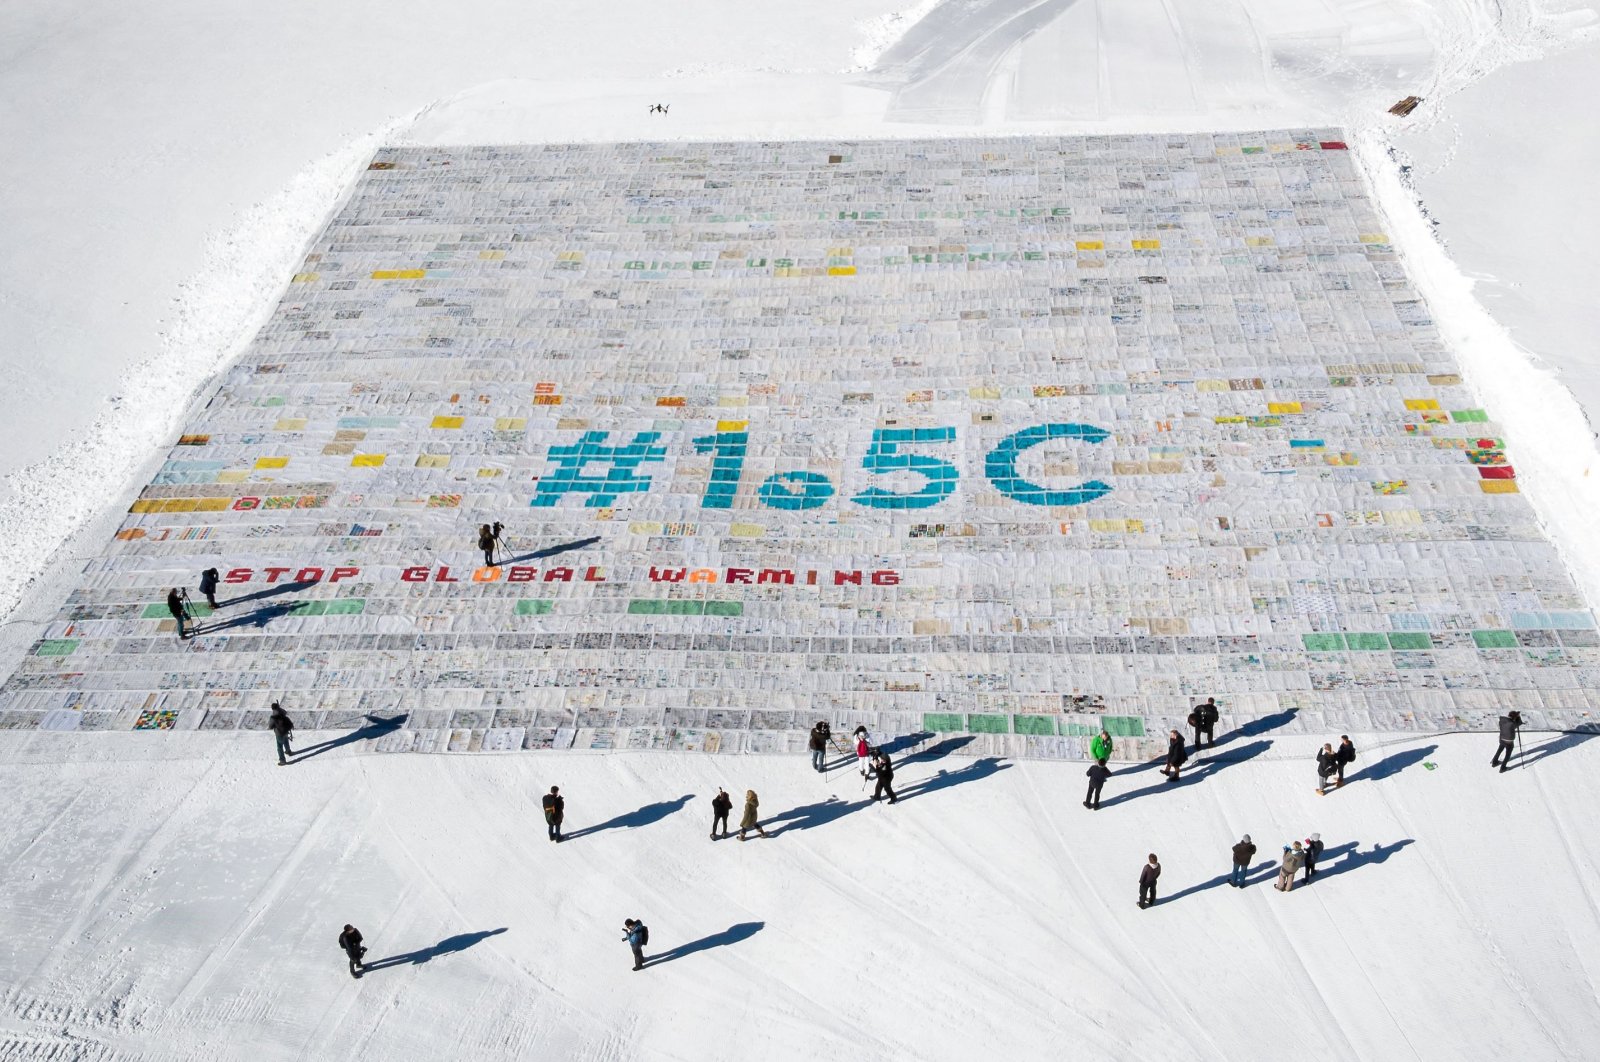 An aerial view shows a massive collage of 125,000 drawings and messages from children from around the world about climate change rolled out on the Aletsch Glacier, near the Jungfraujoch in the Swiss Alps, Switzerland, Nov. 16, 2018. (AFP Photo)